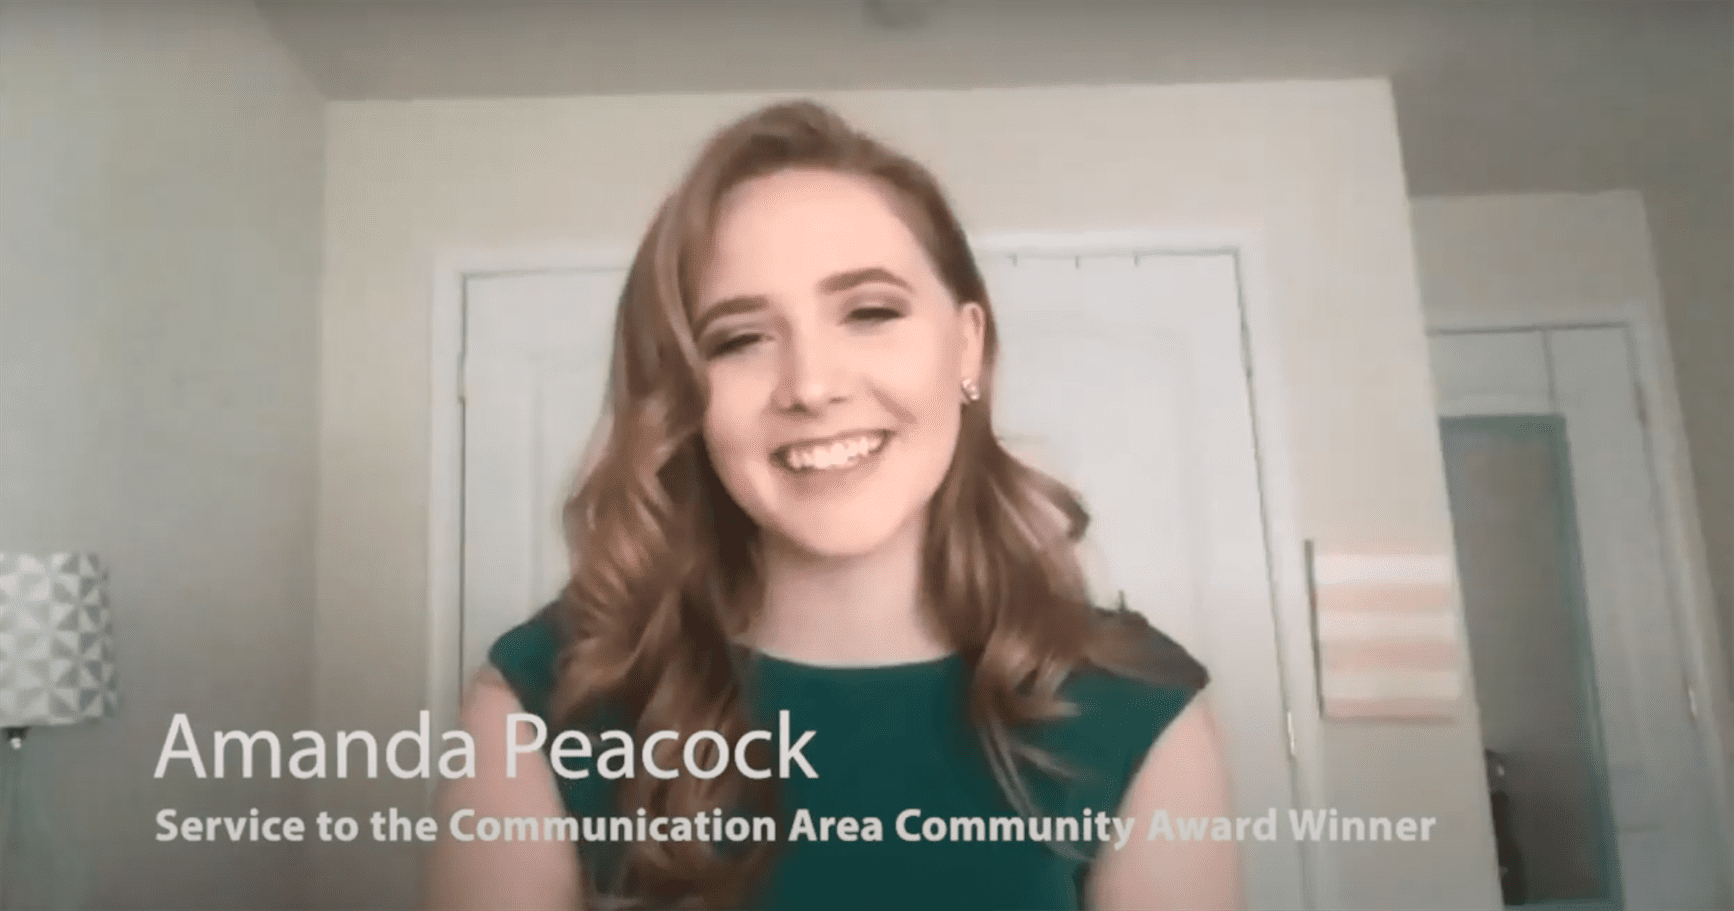 Amanda Peacock is the Service to the Communication Area Community Award winner. Photo Courtesy of the School of Communication and Media.